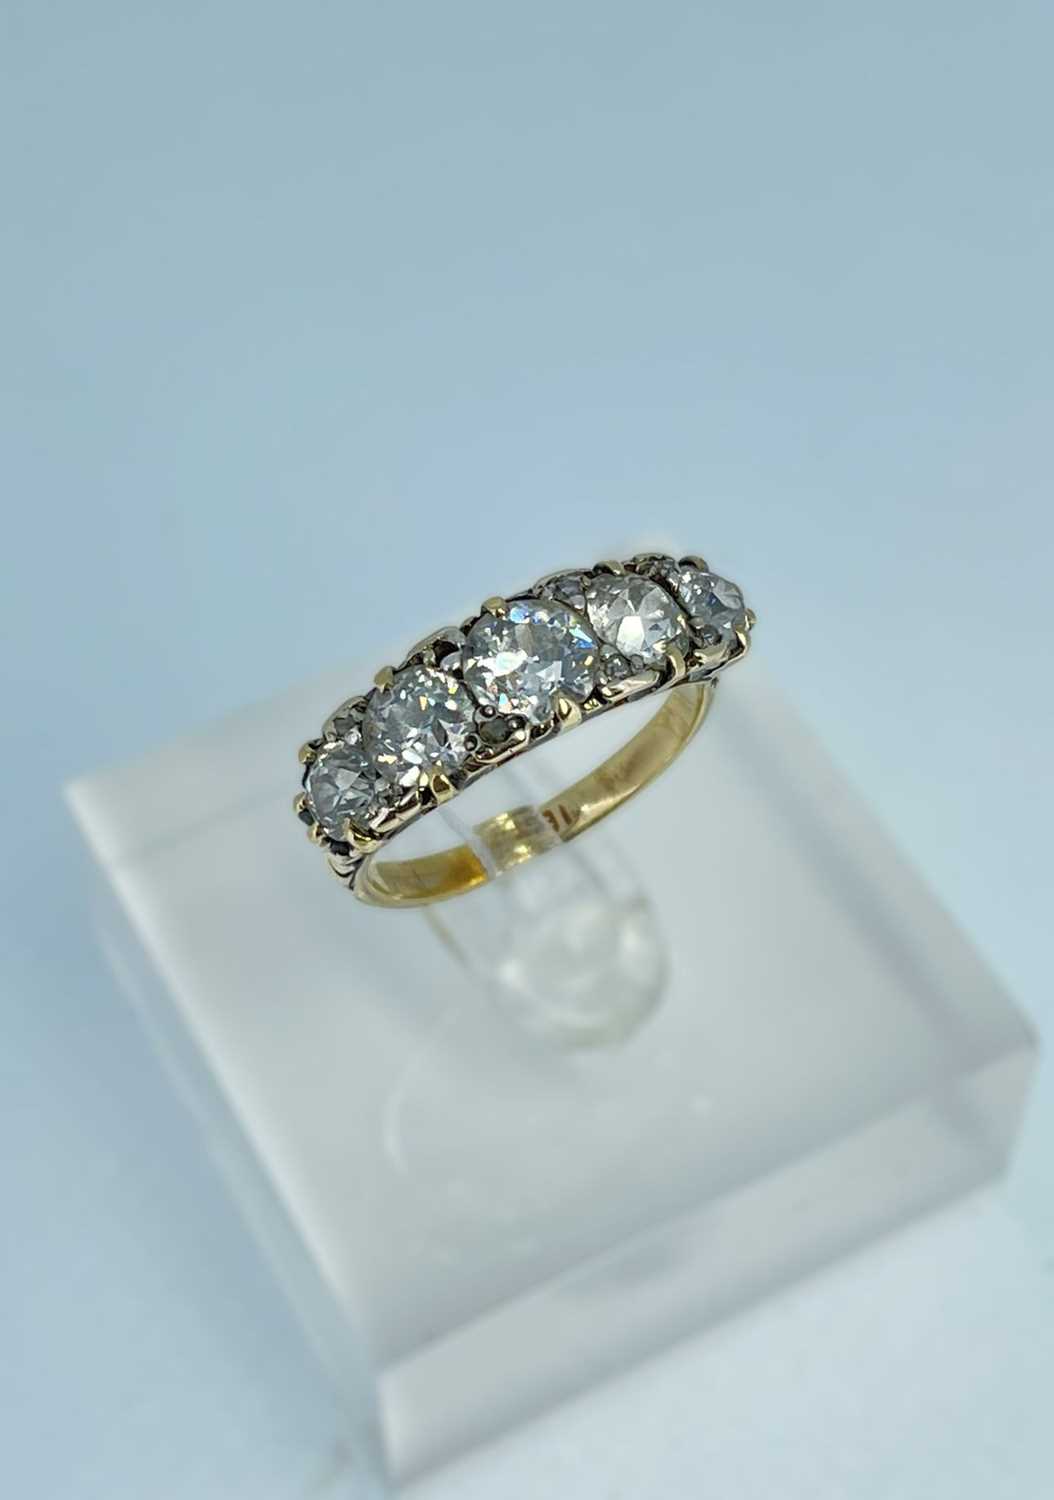 18CT GOLD FIVE-STONE DIAMOND RING, the five pavé set old European cut stones measuring 1.4cts